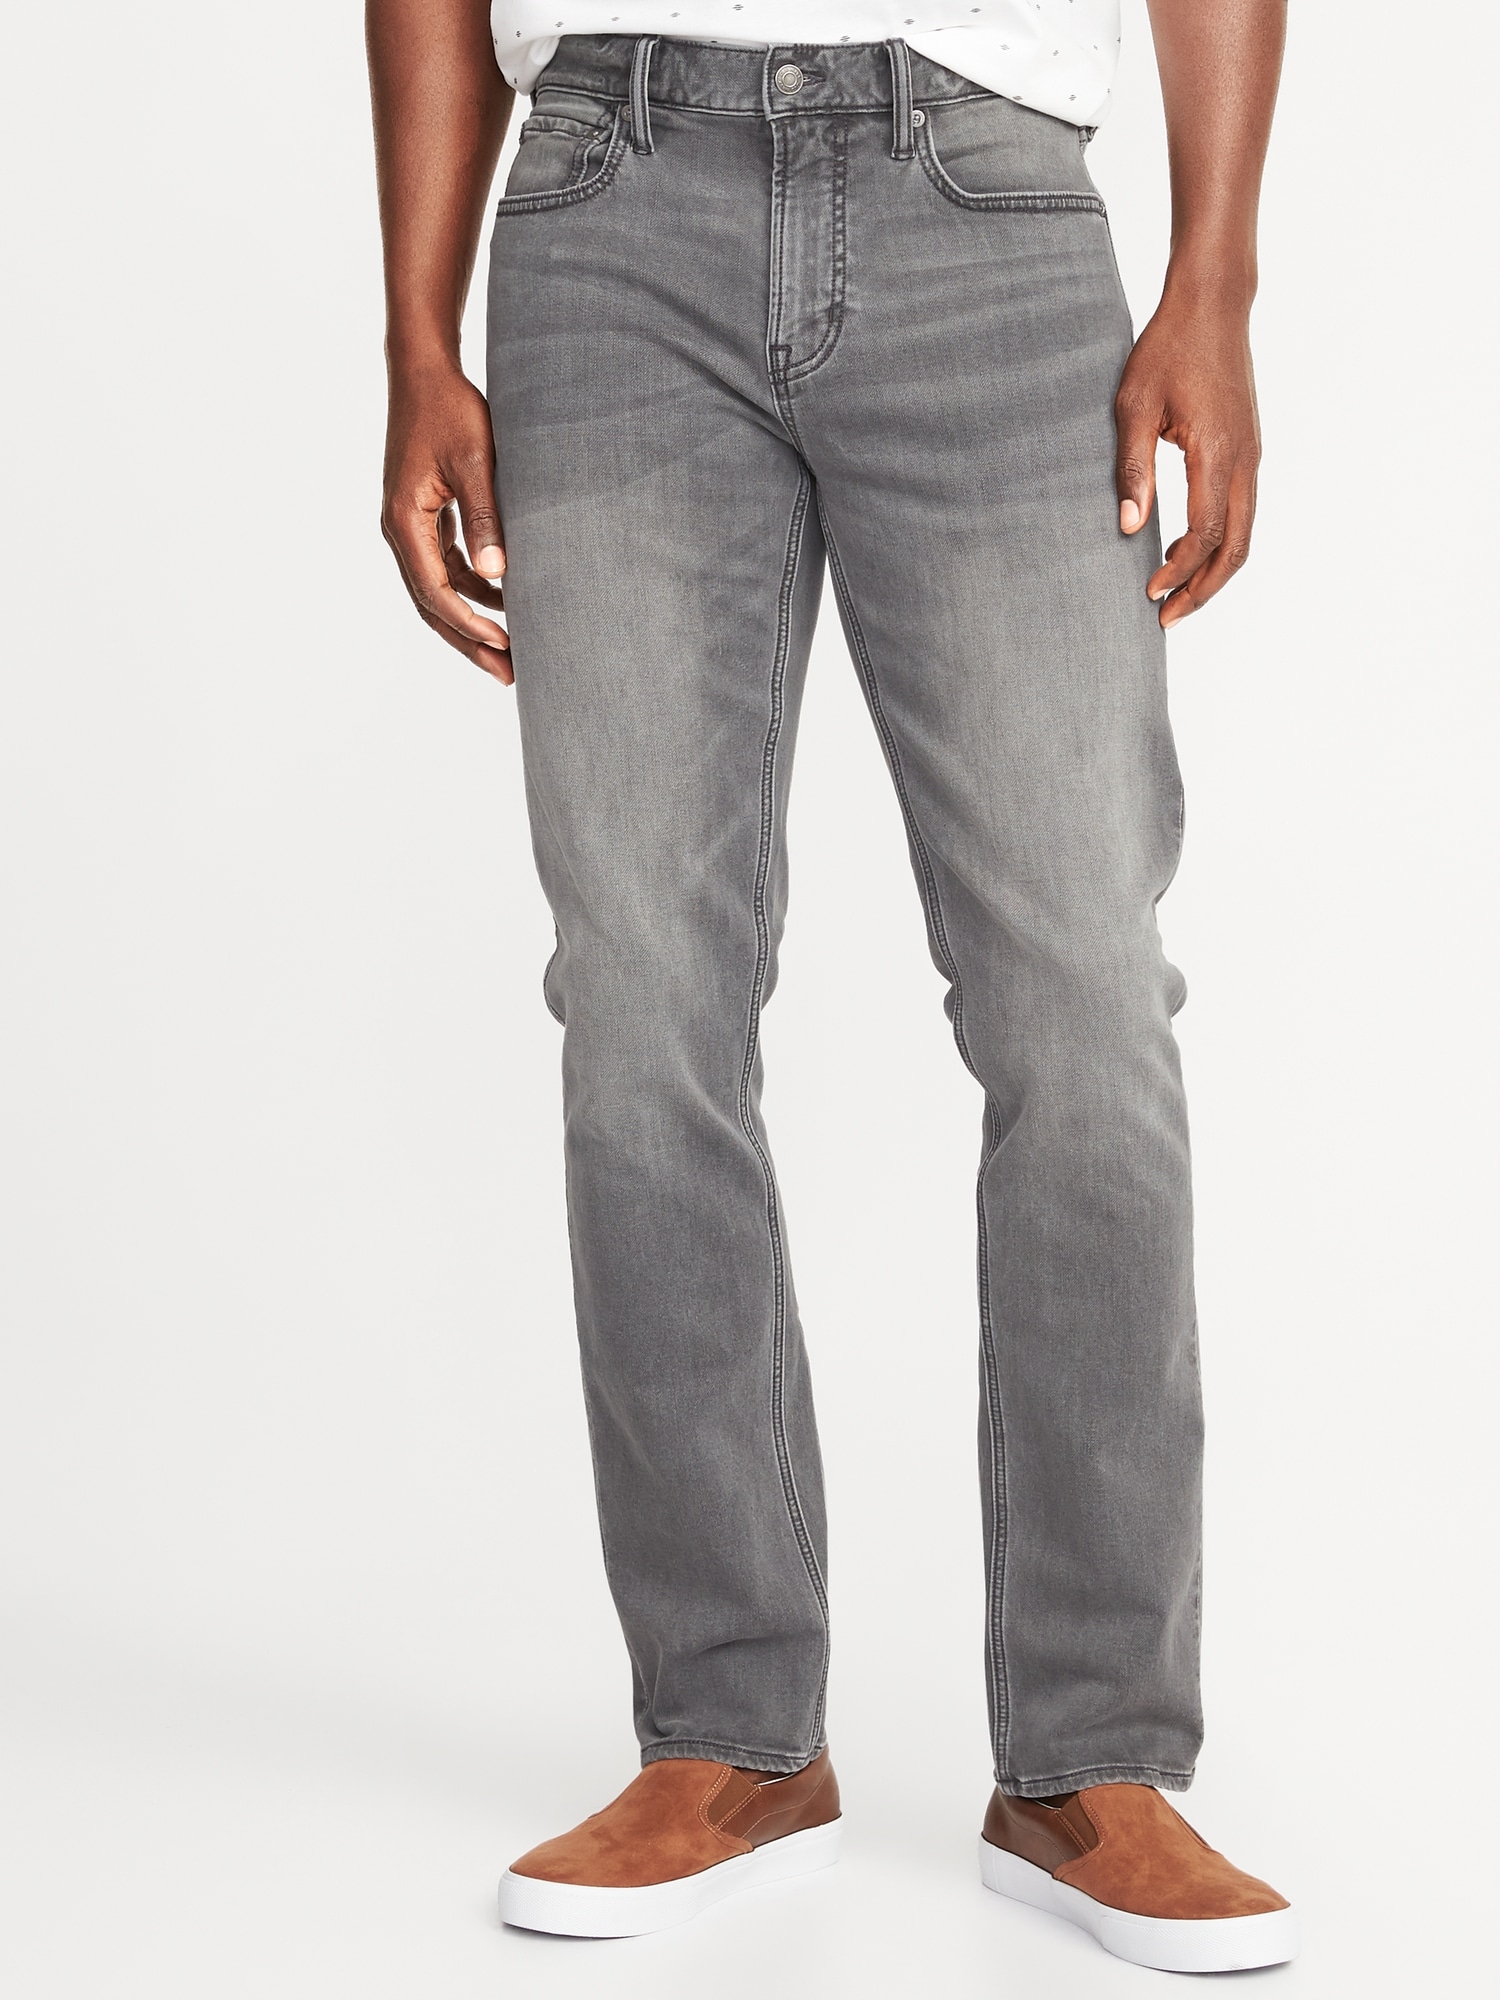 grey jeans old navy